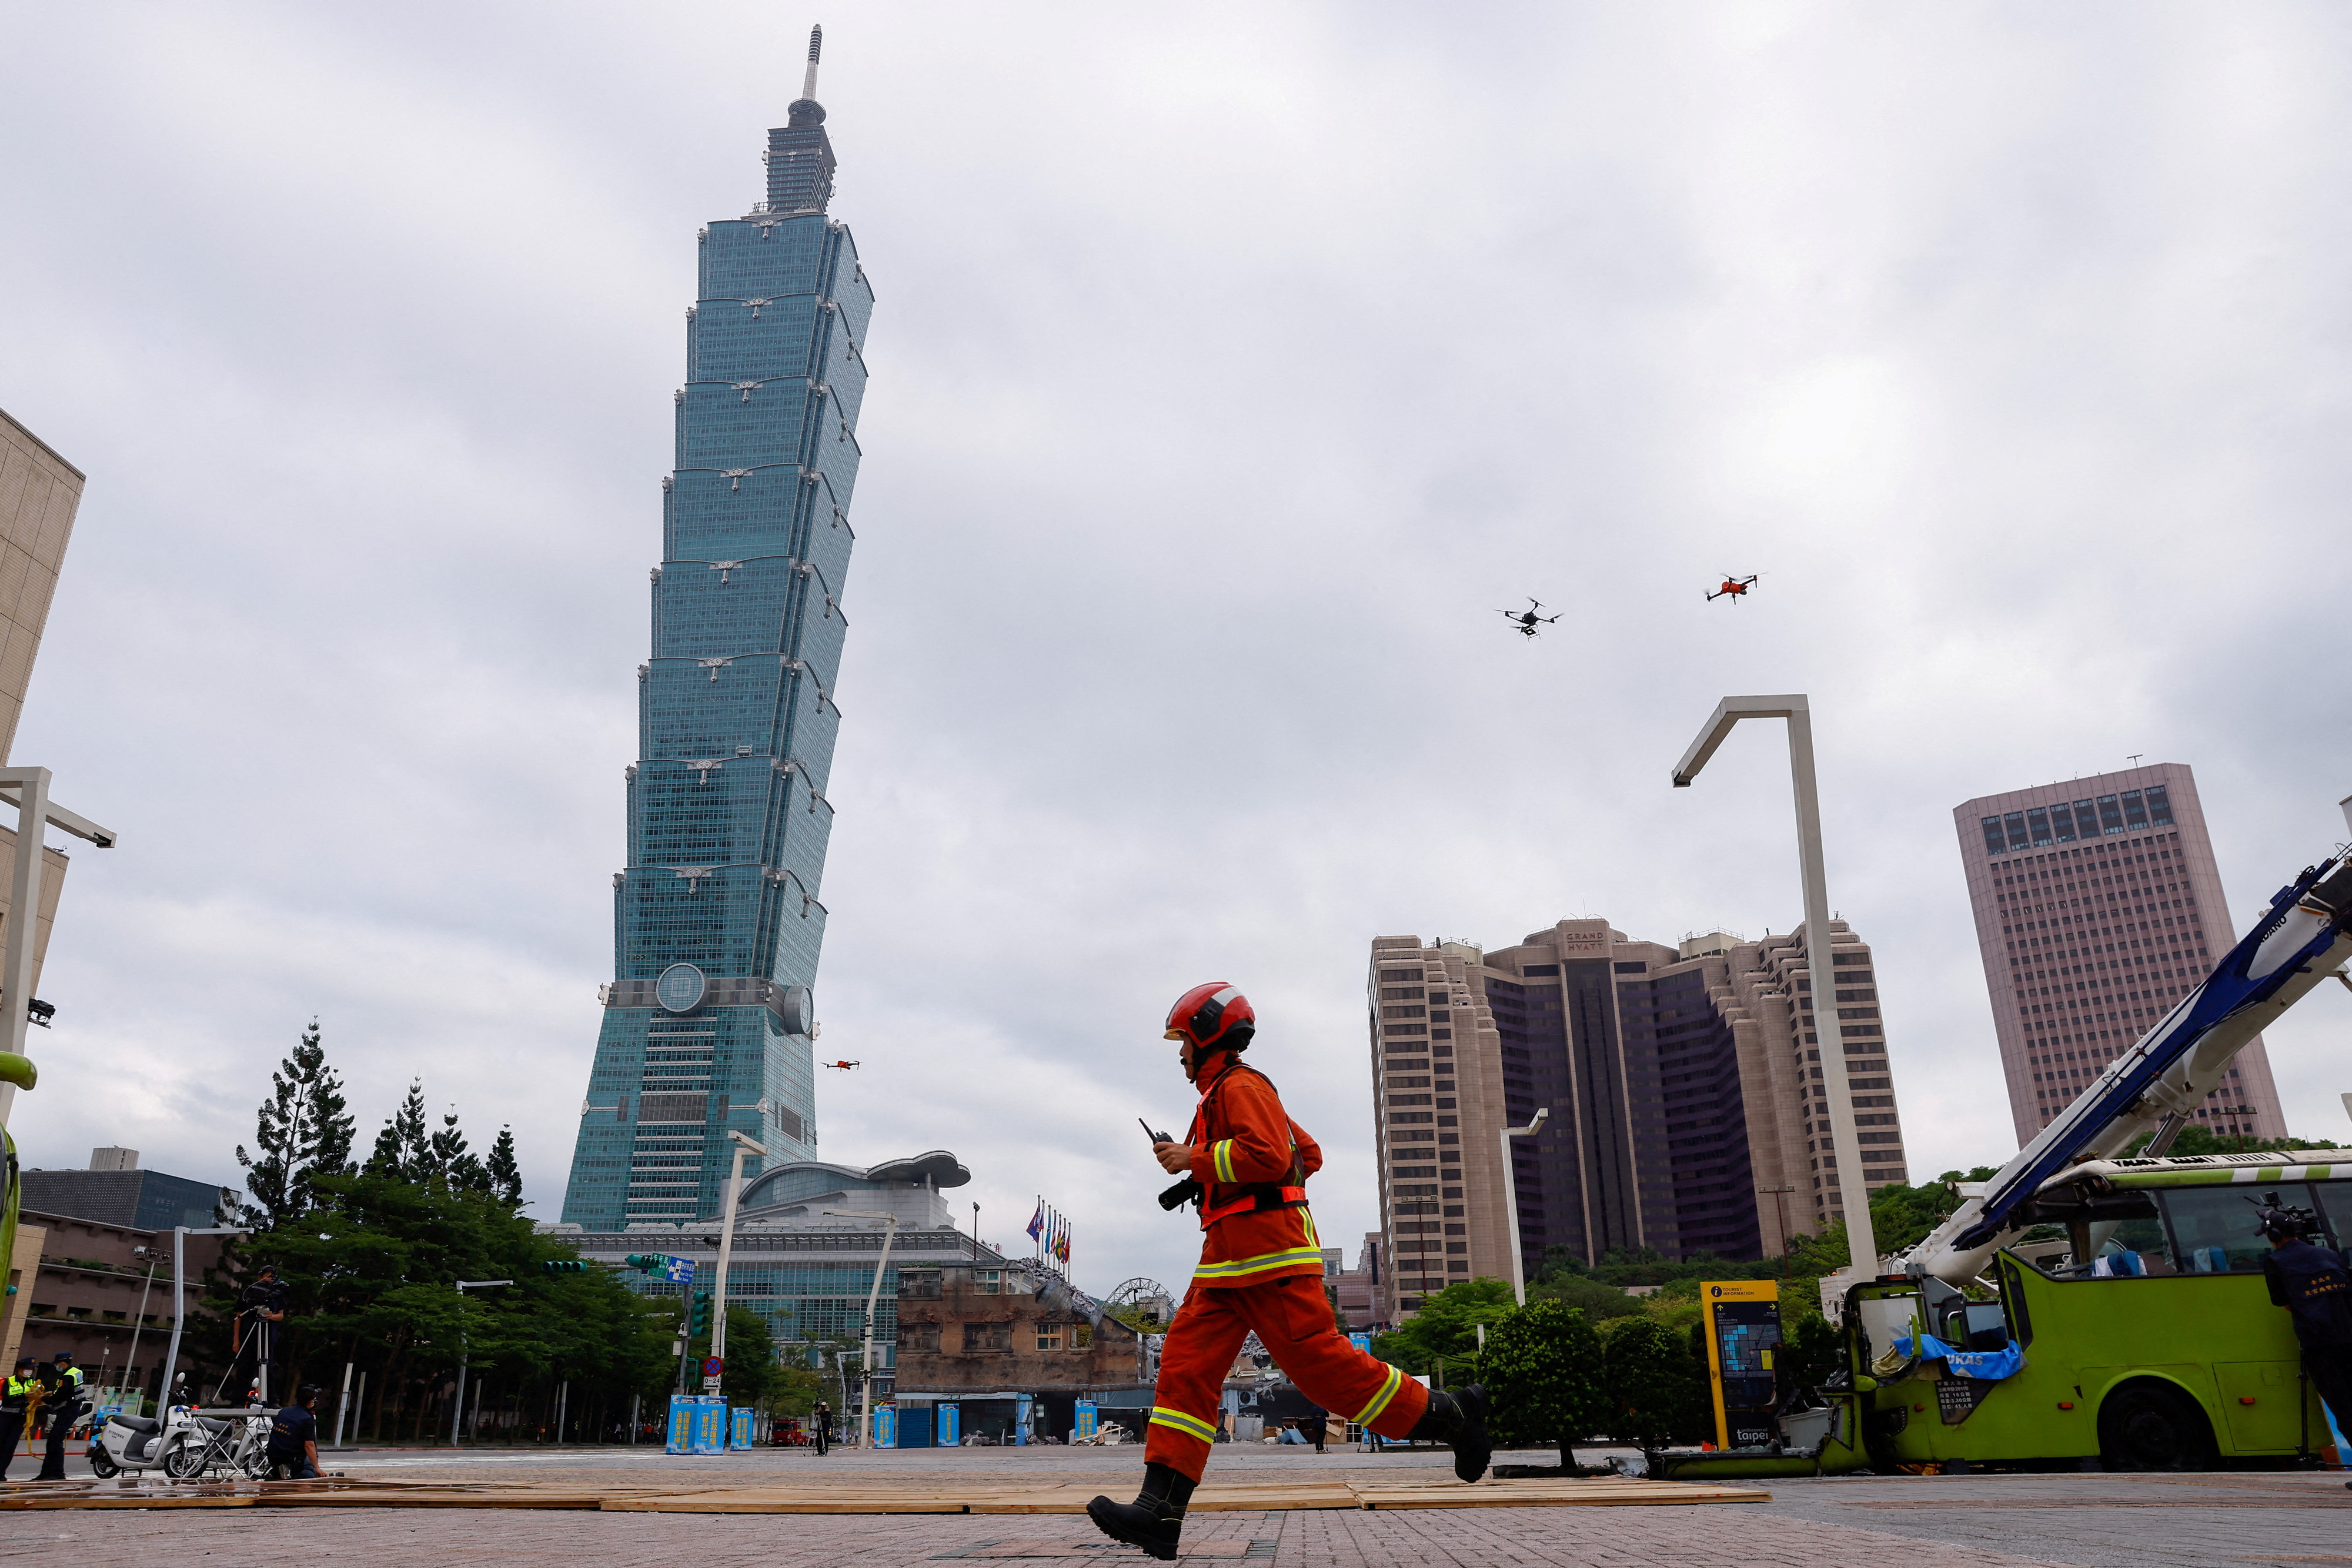 Martin-A firefighter runs during the annual Minan civilian defense drill, which this year focuses on the response from various agencies and volunteer groups if under attack by China in front of Taipei City hall in Taipei, Taiwan May 4, 2023